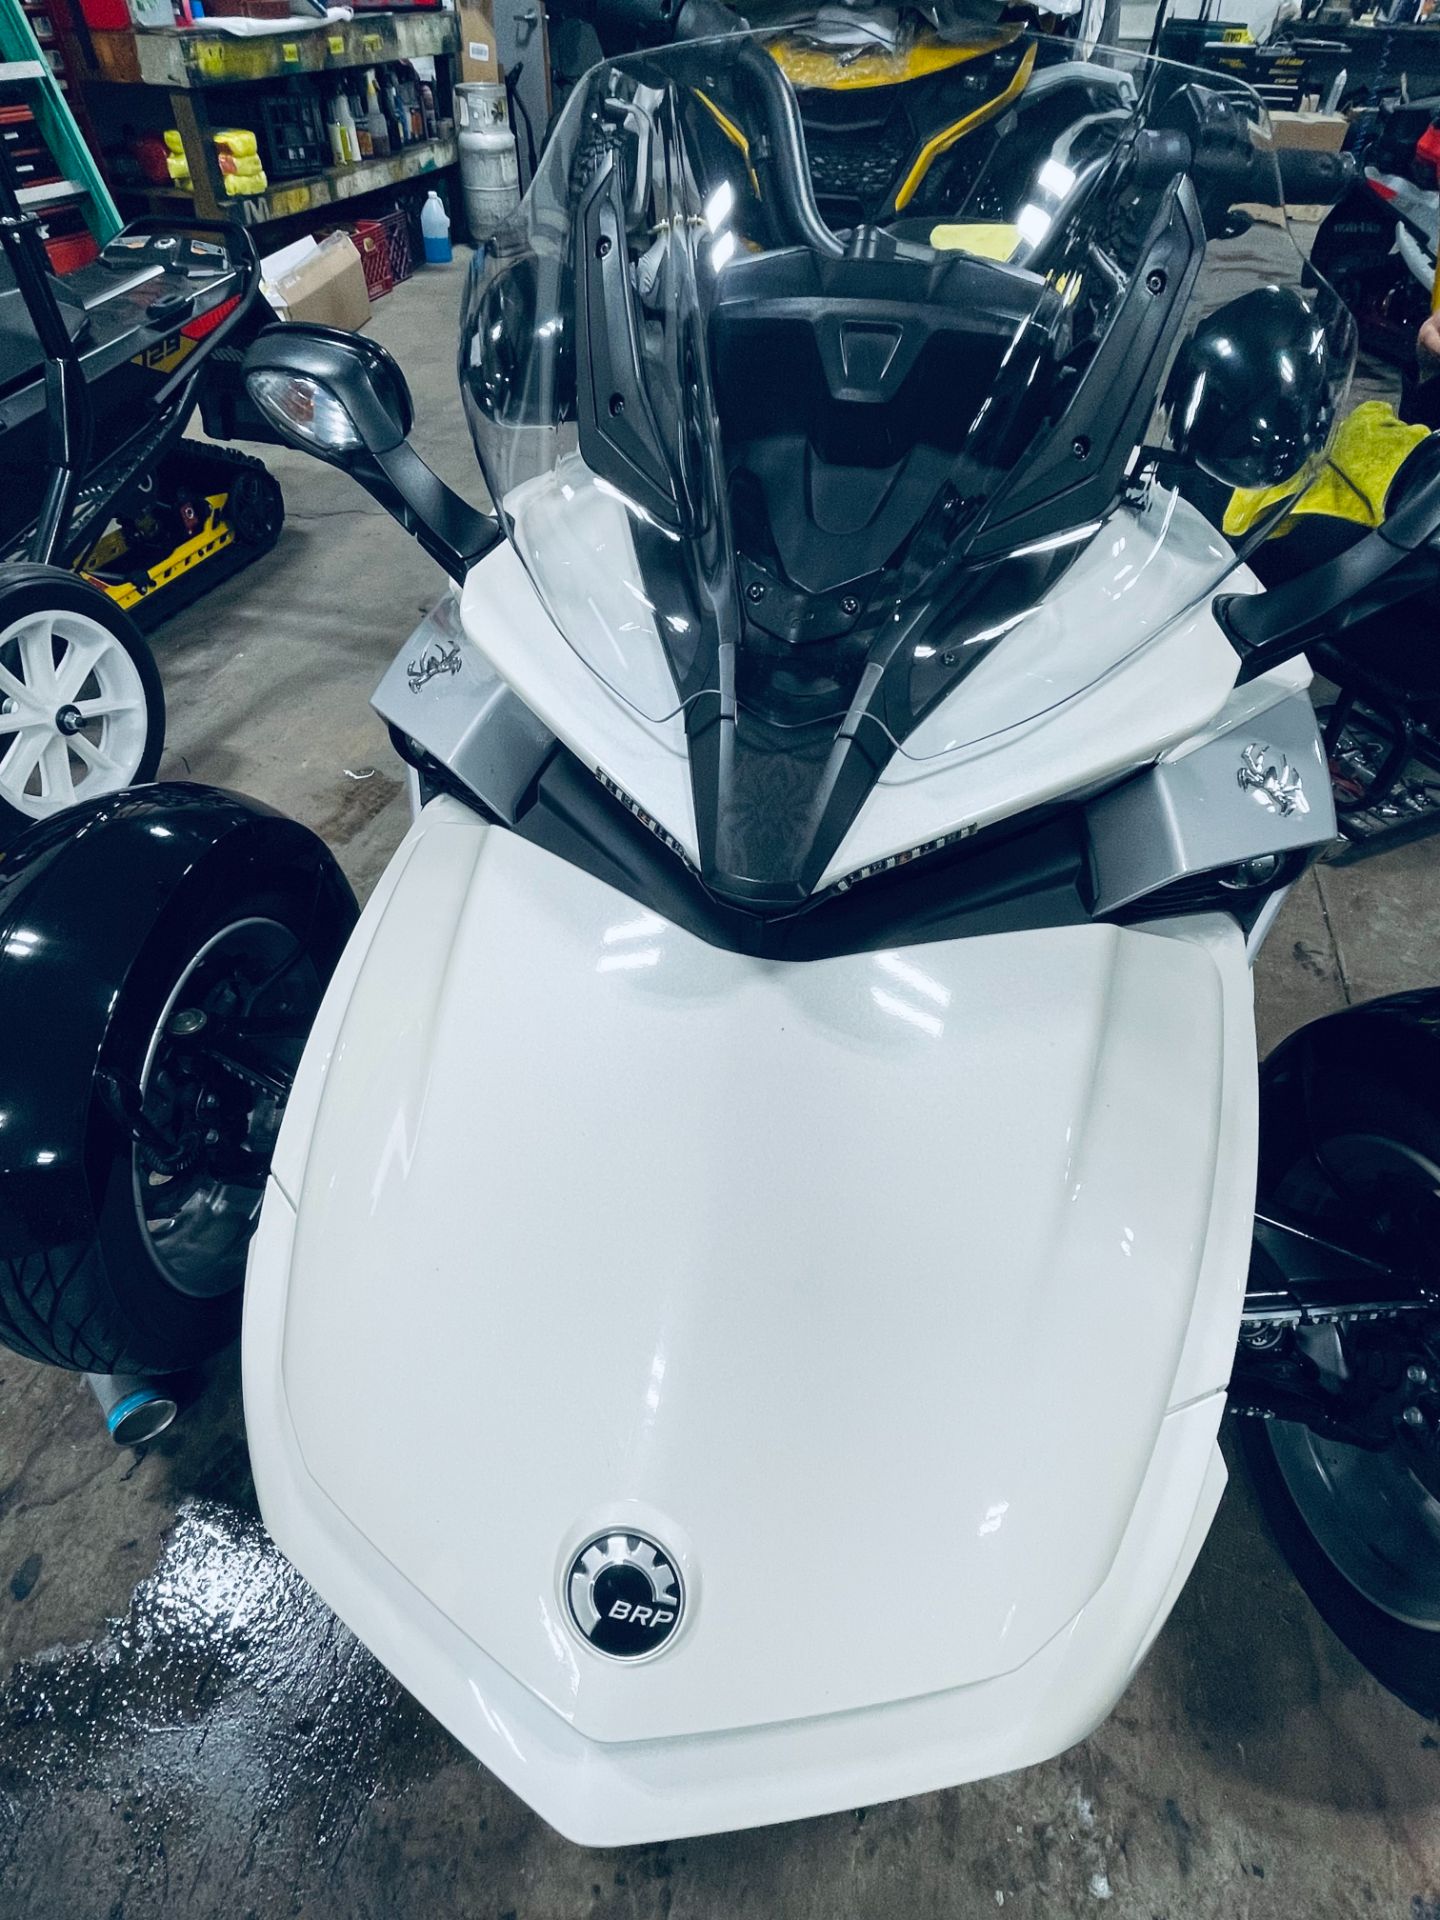 2015 Can-Am Spyder® F3 SE6 in Wilmington, Illinois - Photo 2